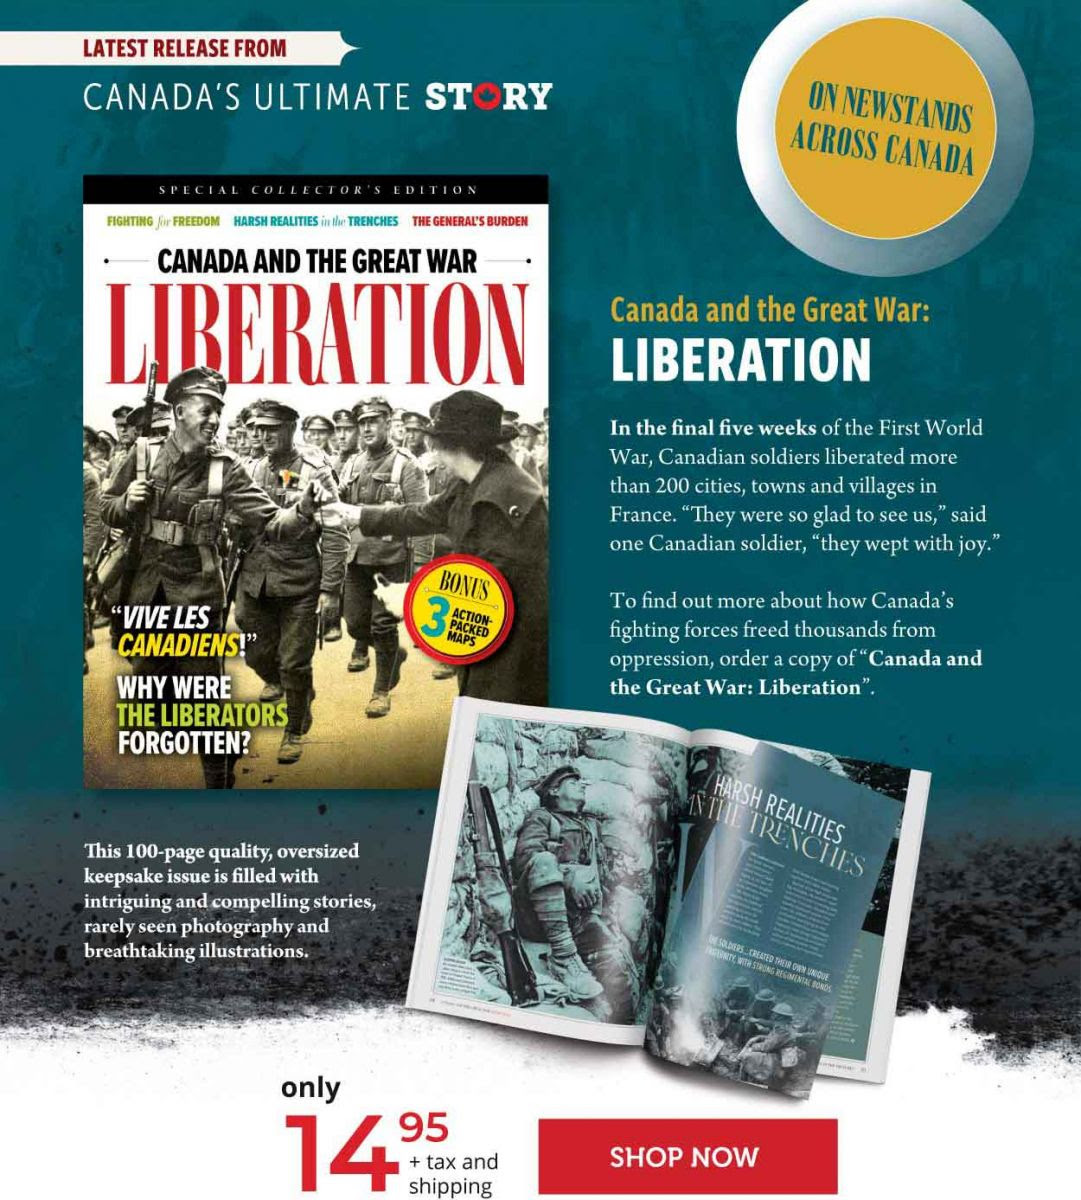 Canada and the Great War: Liberation